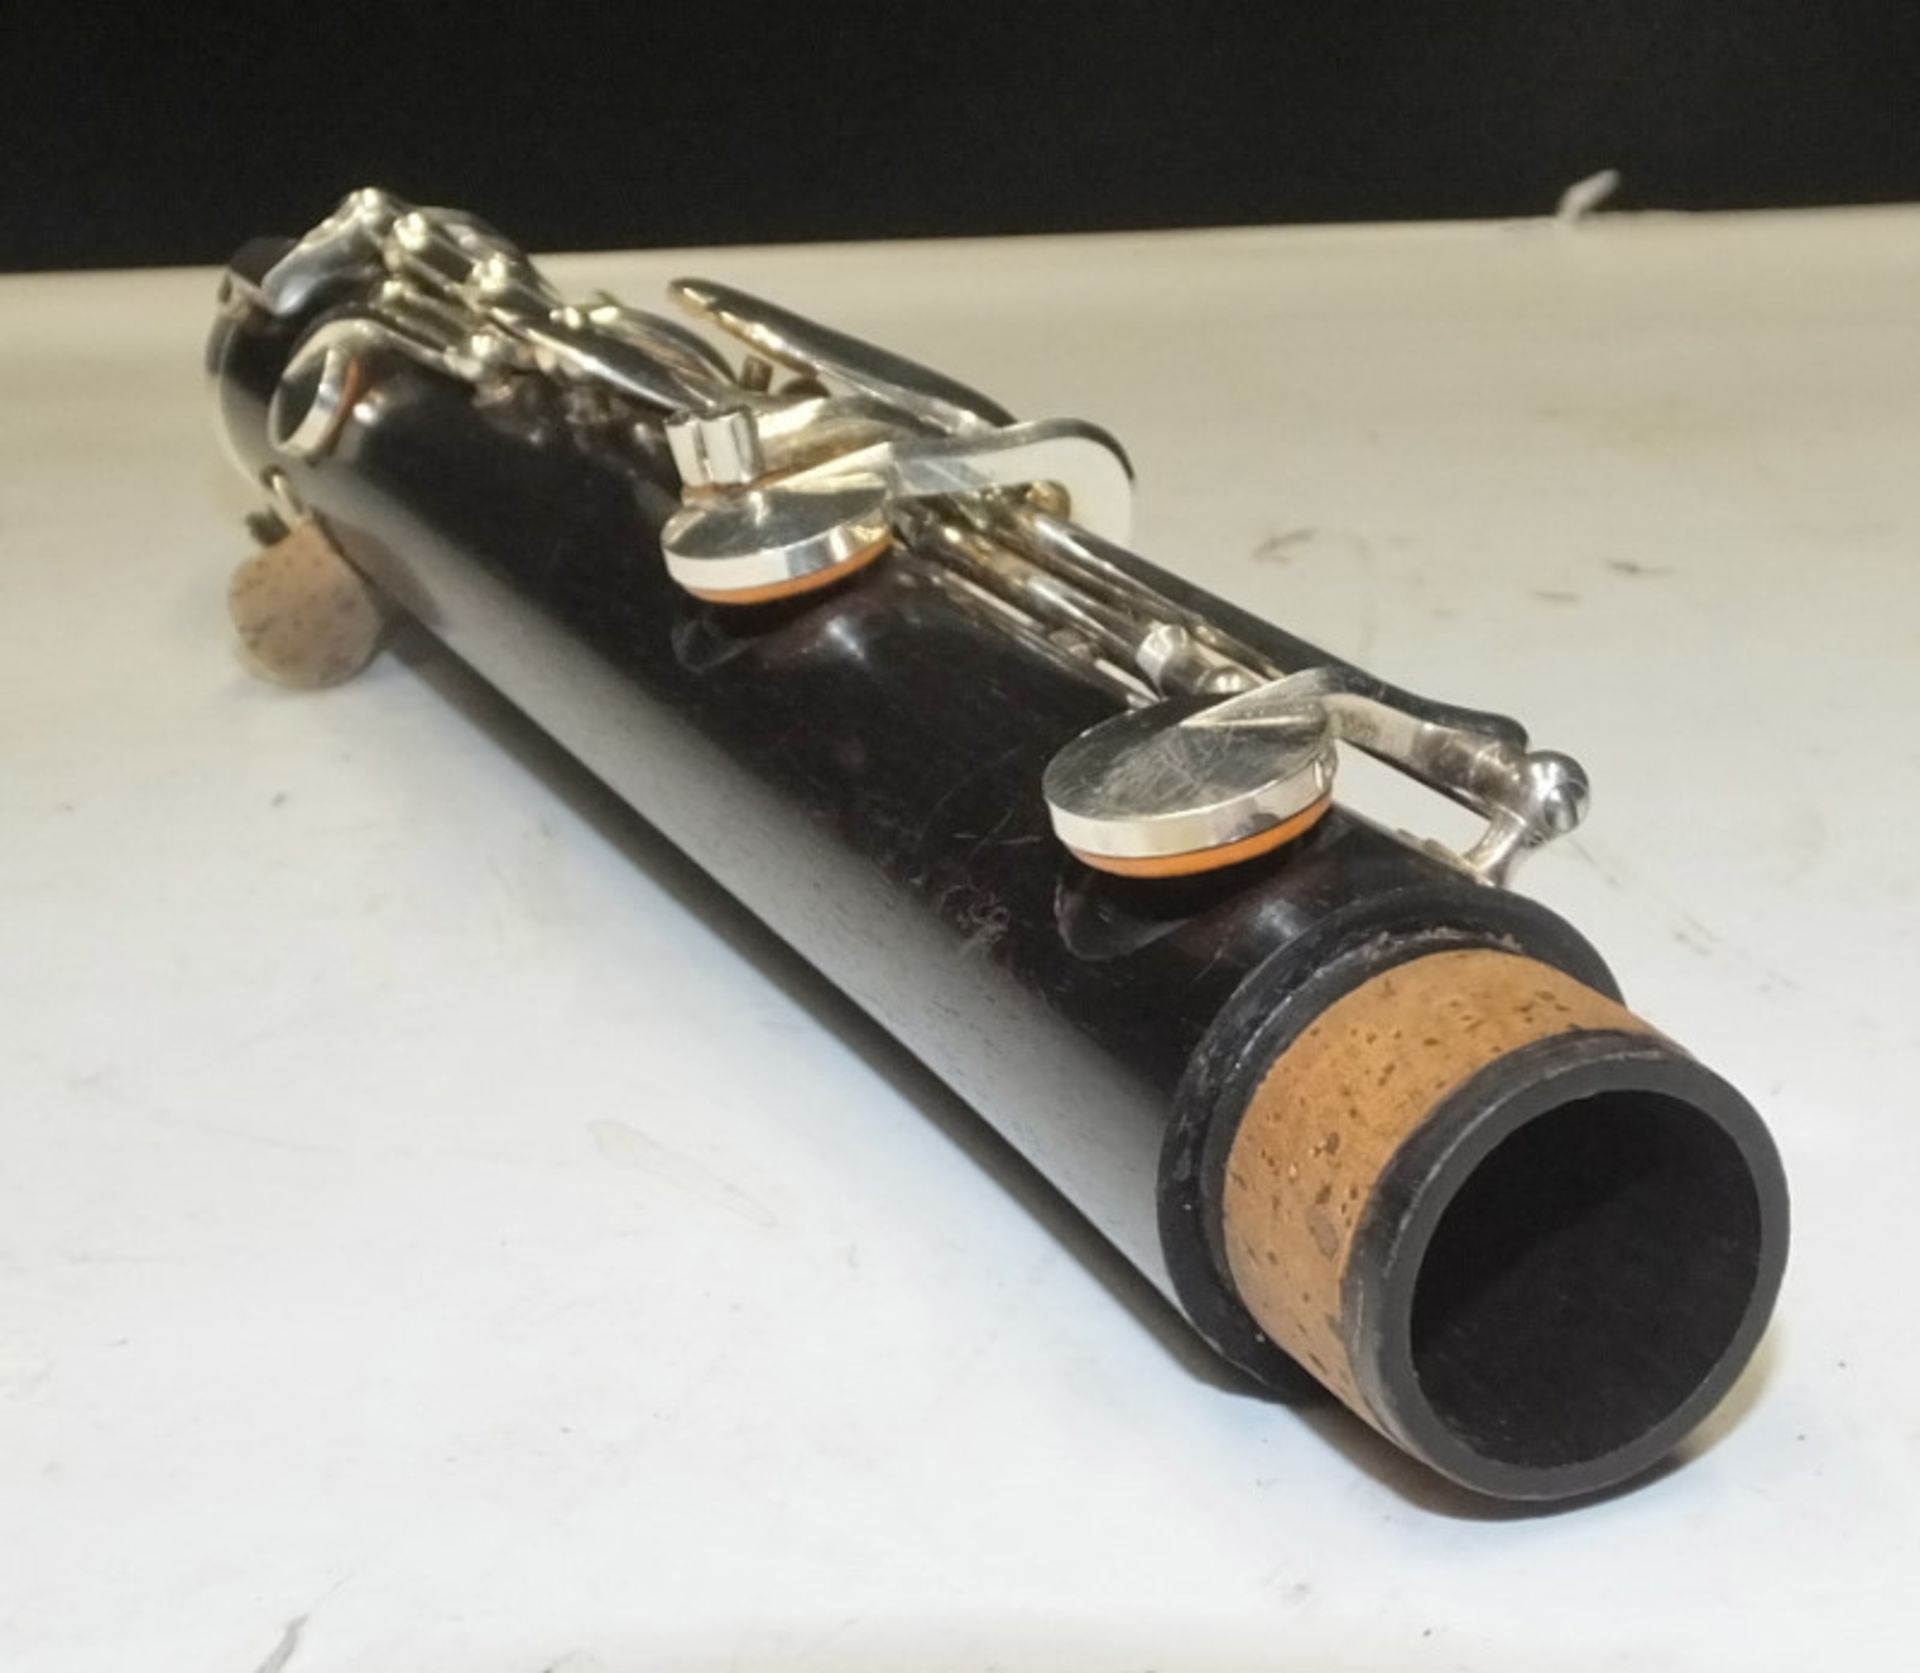 Howarth S2 Clarinet in case - Serial Number - 2153. - Image 10 of 22